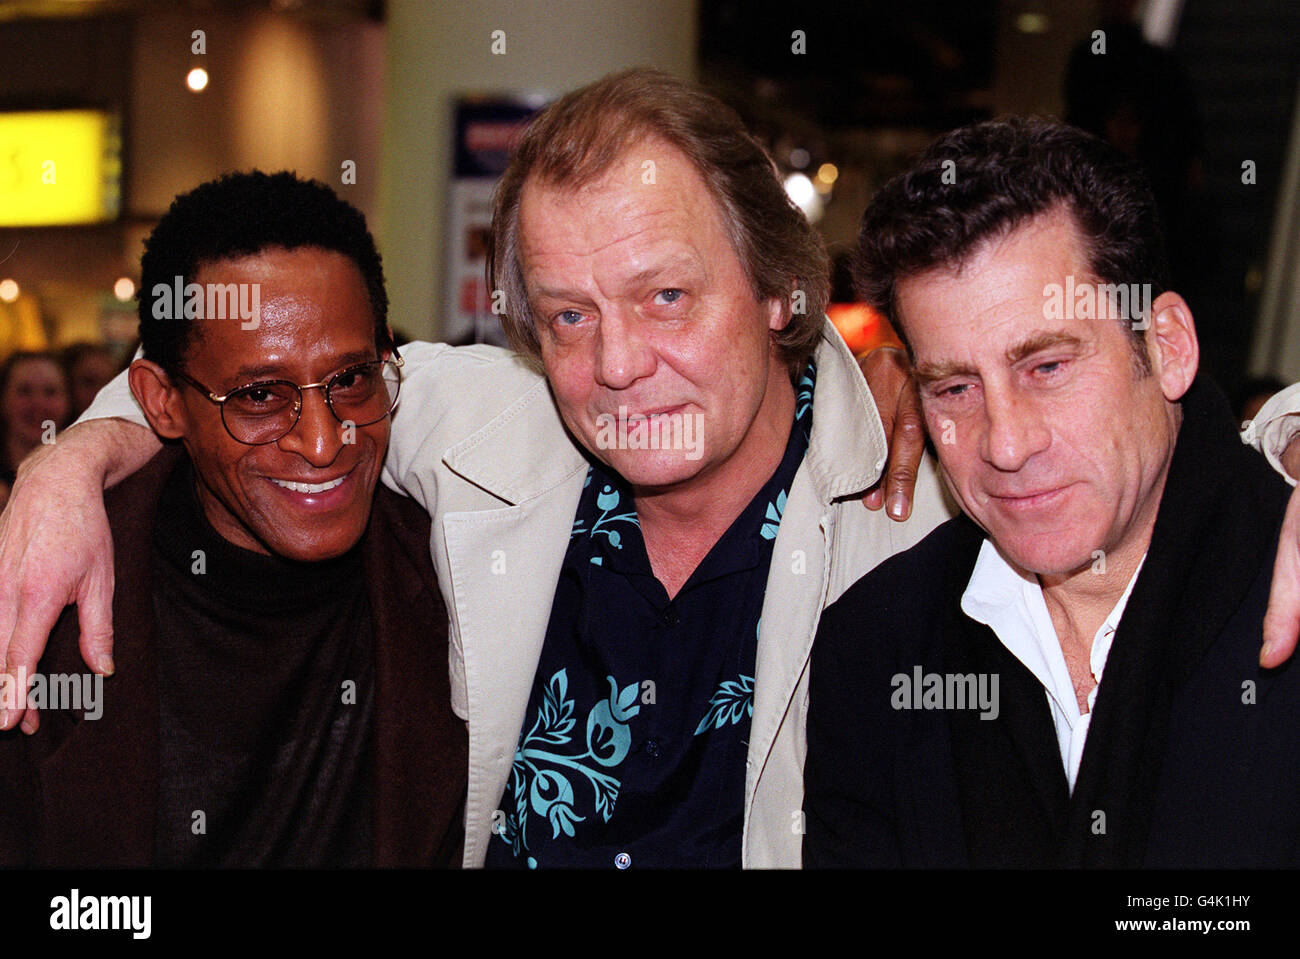 Stars of the hit 70's TV show Starsky and Hutch (l-r) Antonio Fargas (Huggy Bear), David Soul (Hutch) and Paul Michael Glaser (Starsky) at the Virgin Megastore in Oxford Street, London, where they signed copies of three new Starsky and Hutch videos. Stock Photo